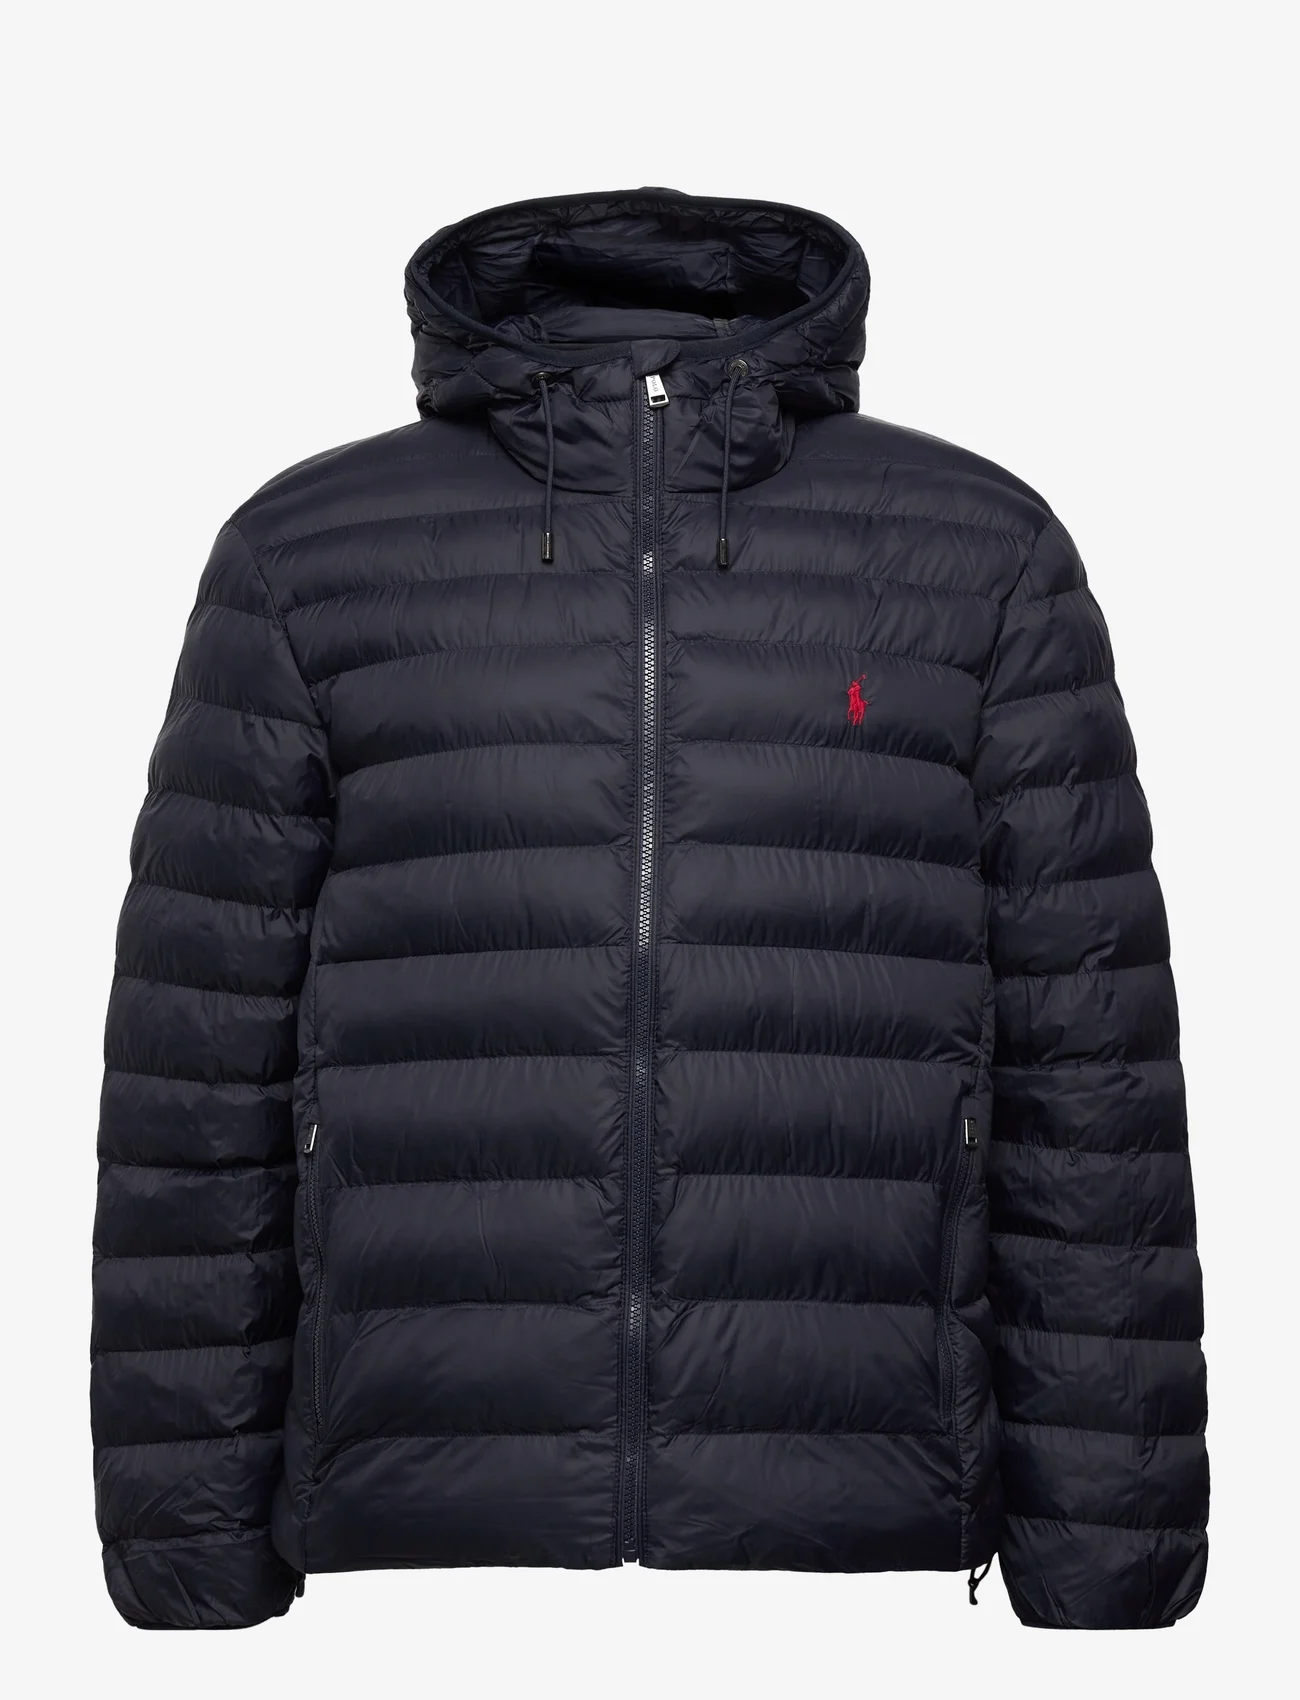 Polo Ralph Lauren The Packable Hooded Jacket  €. Buy Padded jackets  from Polo Ralph Lauren online at . Fast delivery and easy returns